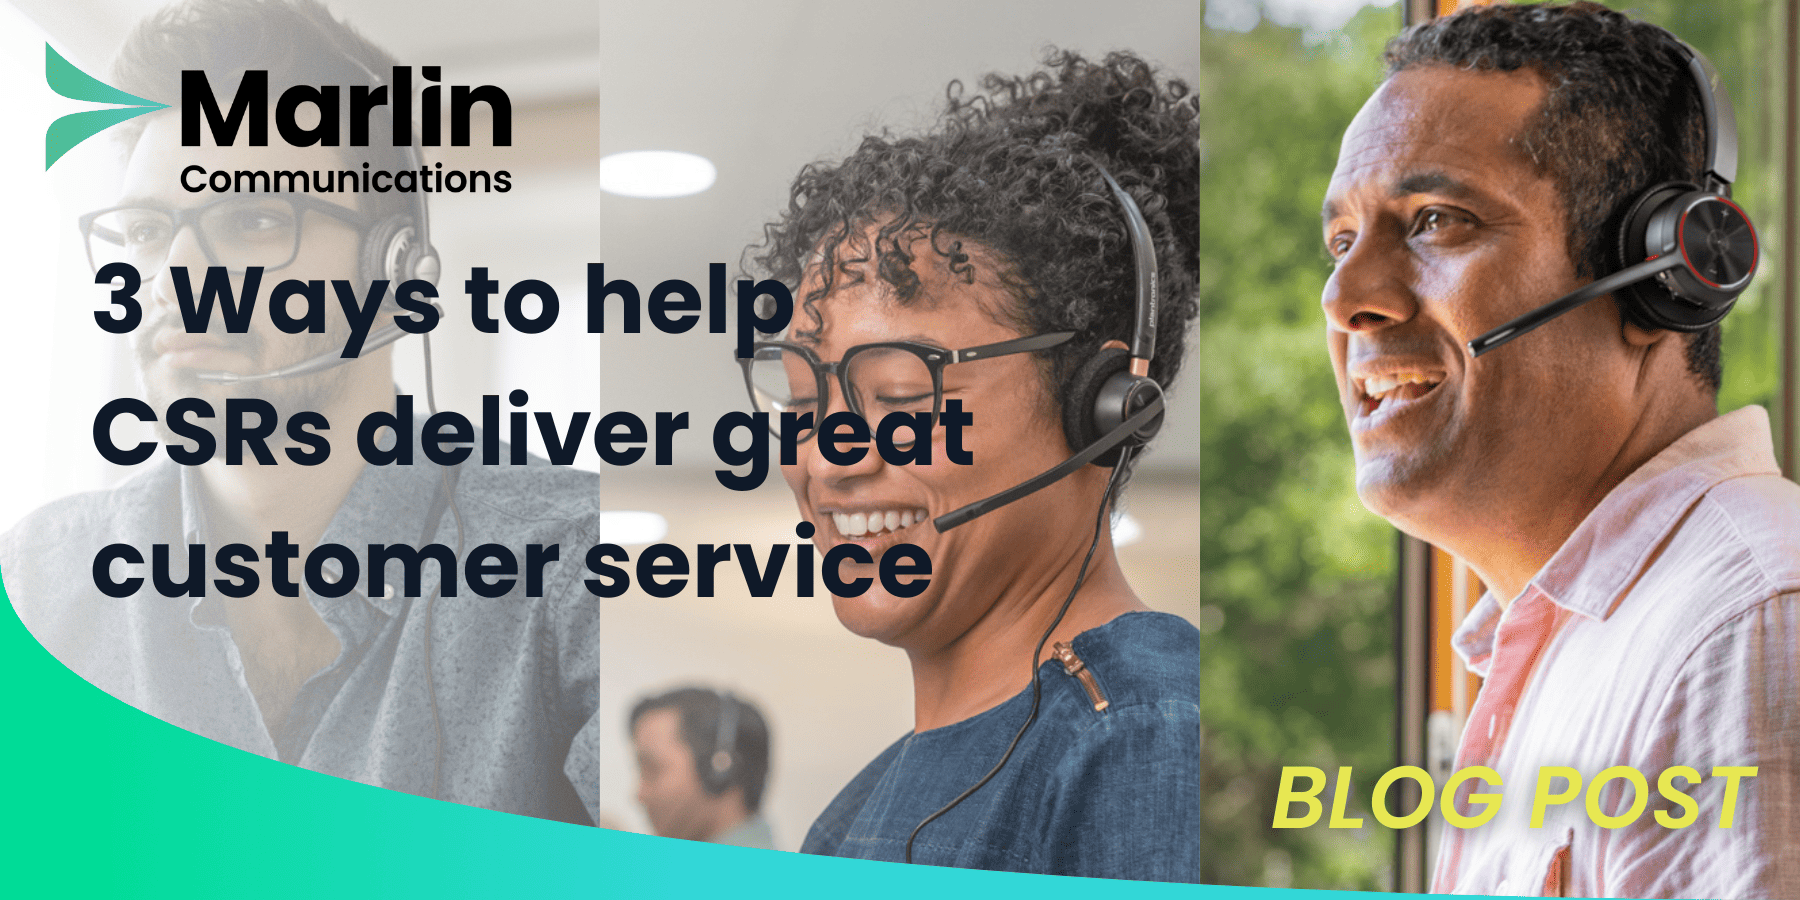 Featured image for “3 Ways to help CSRs deliver great customer service”